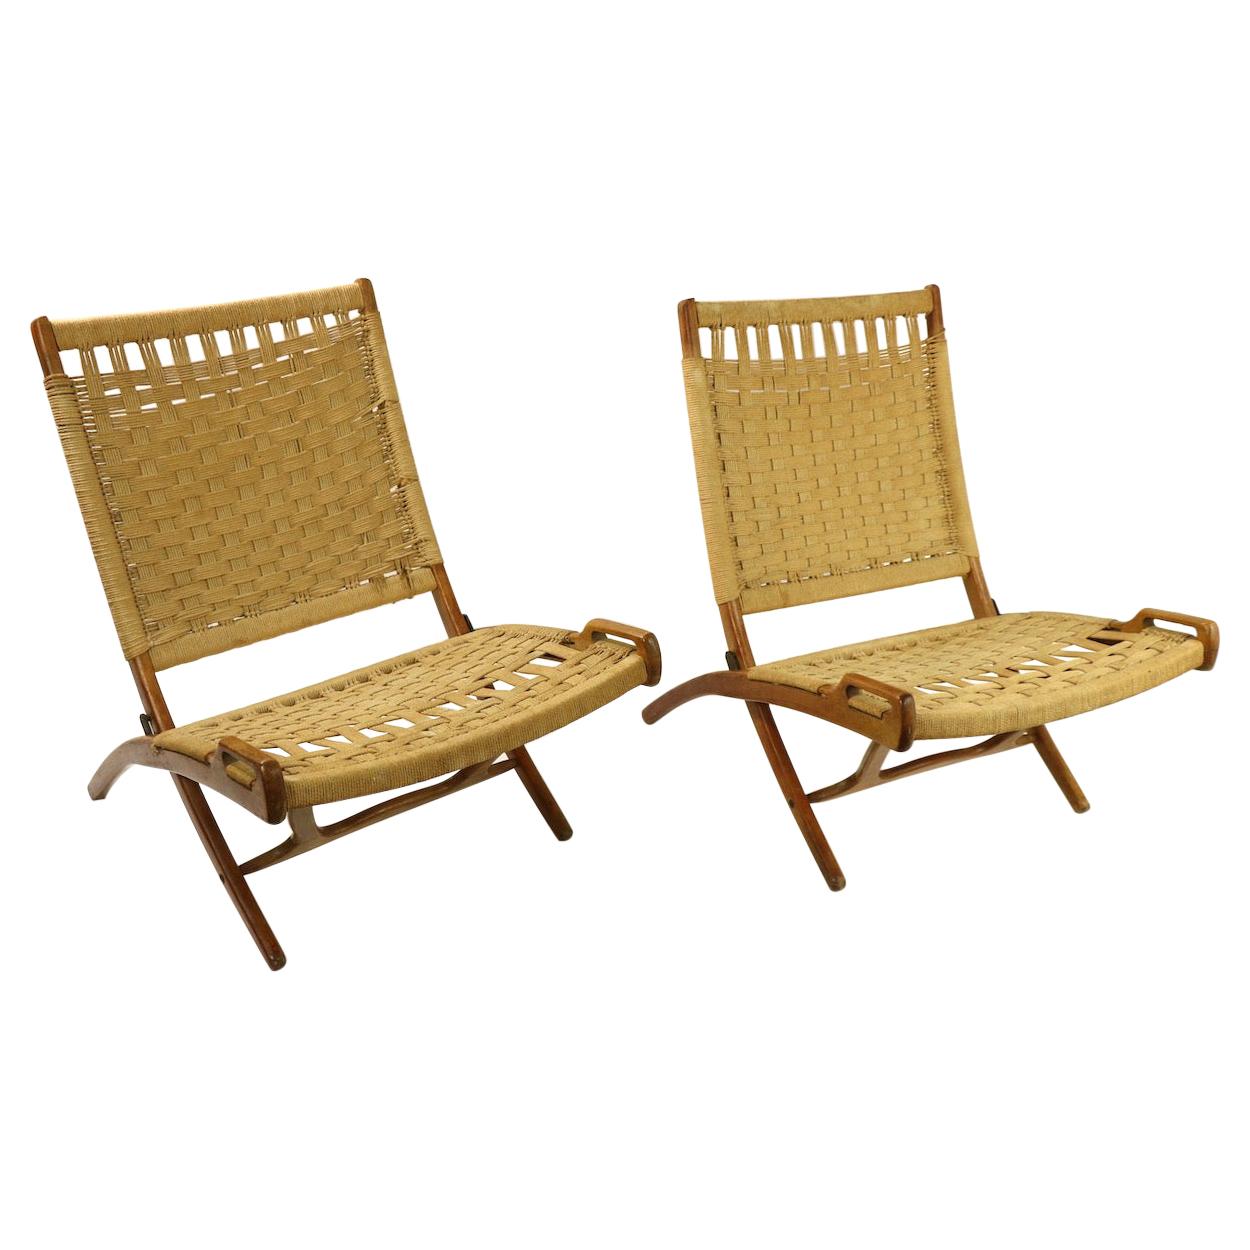 Pair of Folding Scissor Chairs Made in Italy after Wegner